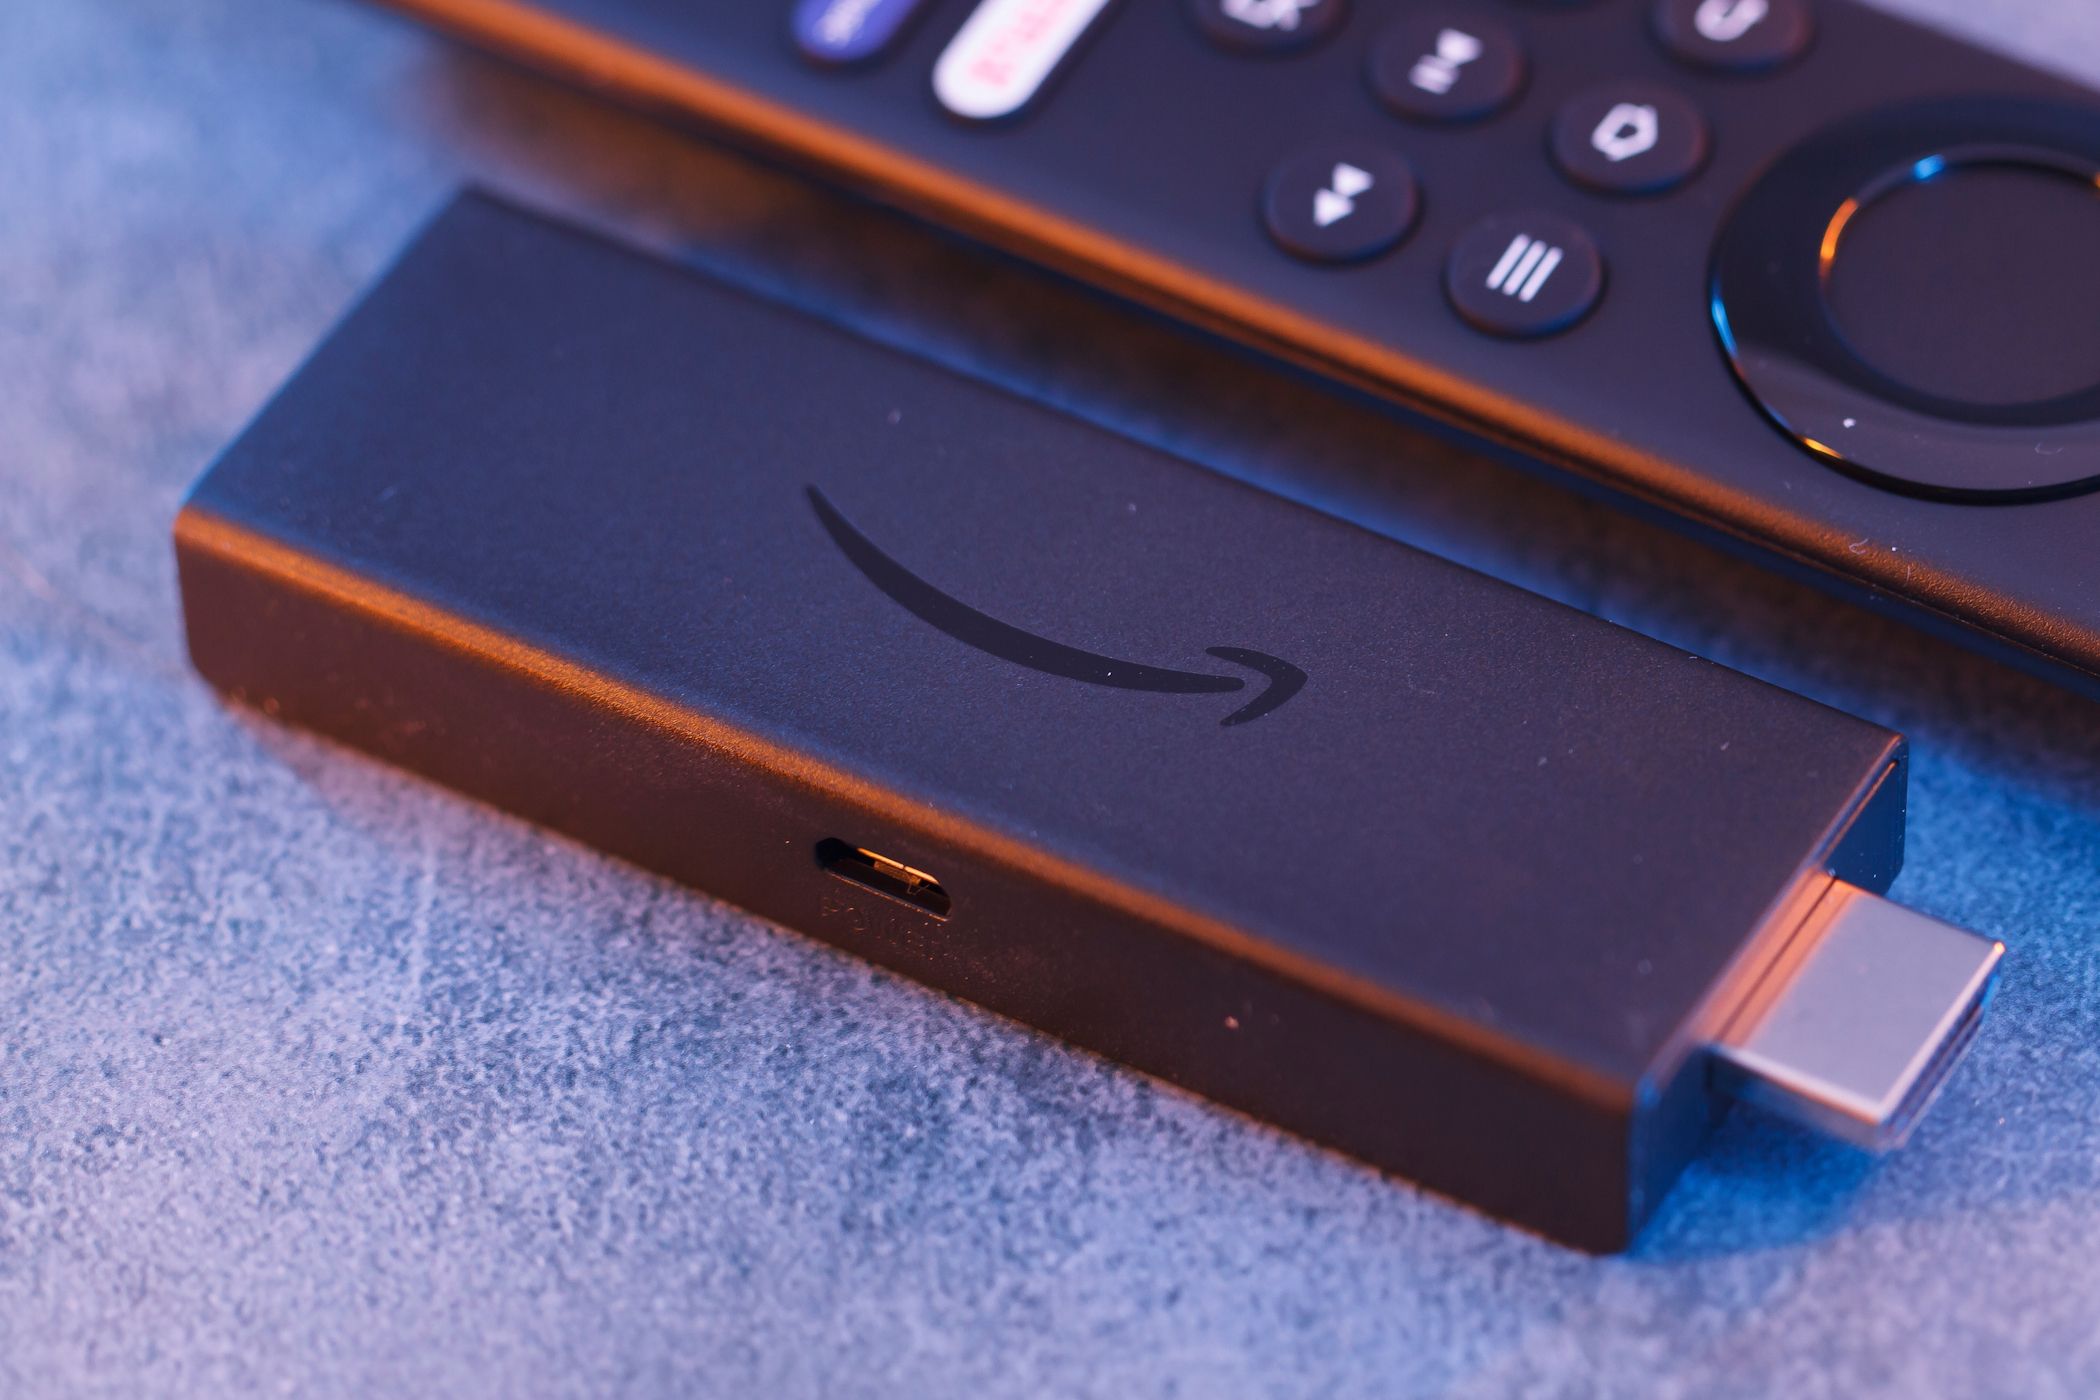 Fire TV Stick Lite vs. Fire TV Stick vs. Fire TV Stick 4K: What’s the Difference?